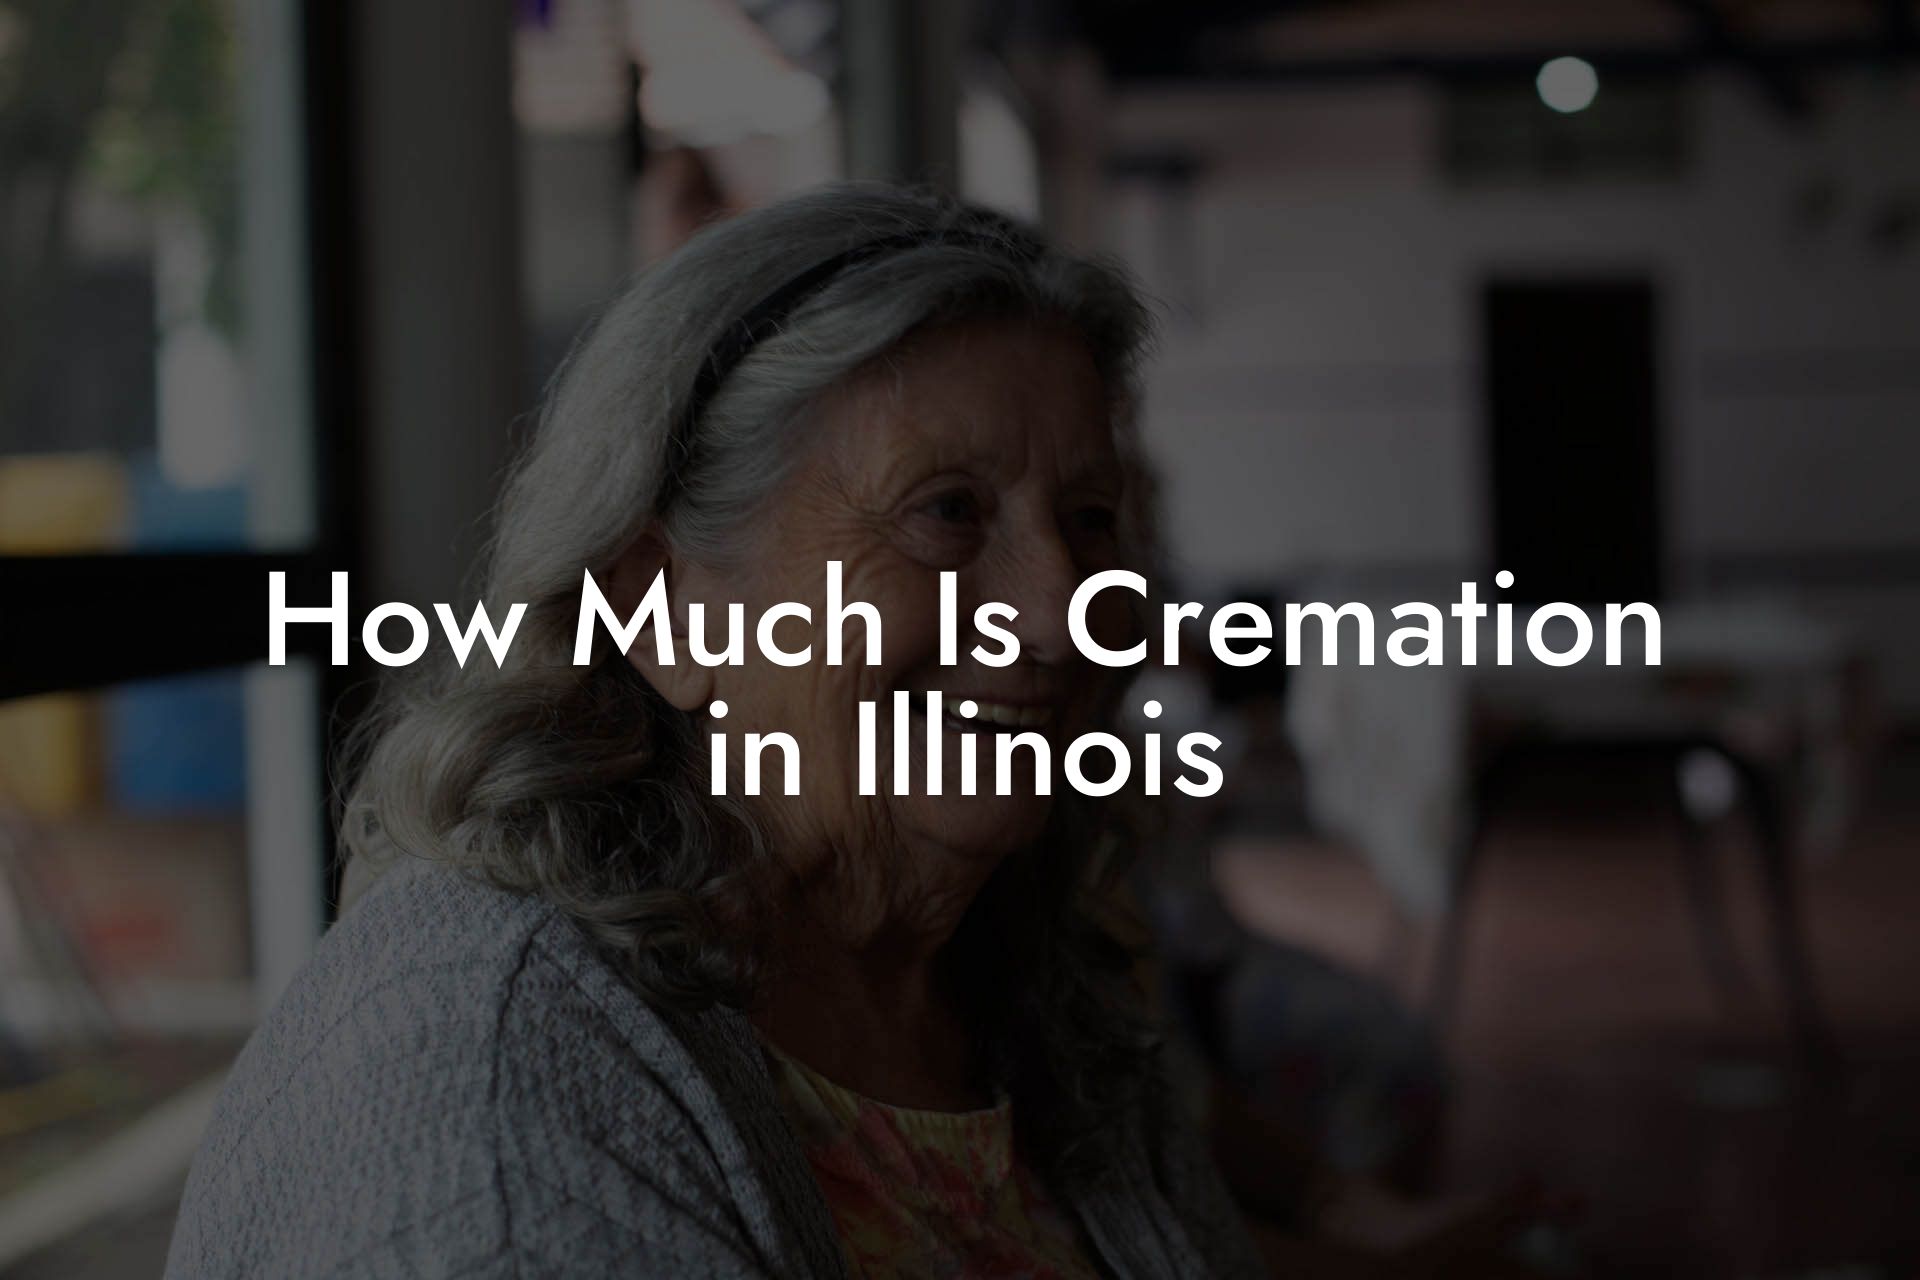 How Much Is Cremation in Illinois